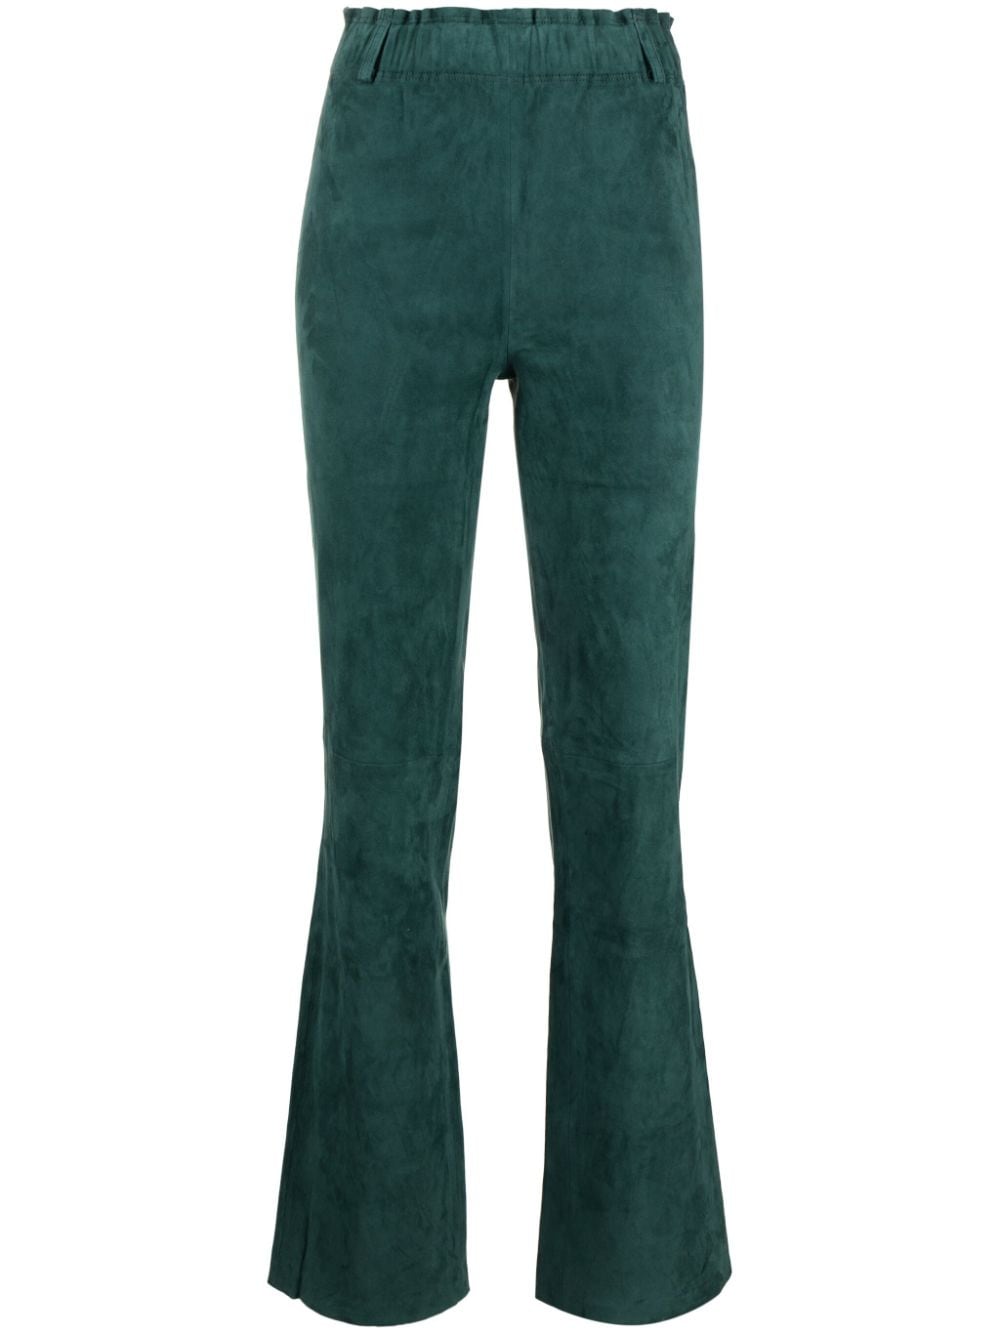 Arma flared leather trousers - Green von Arma